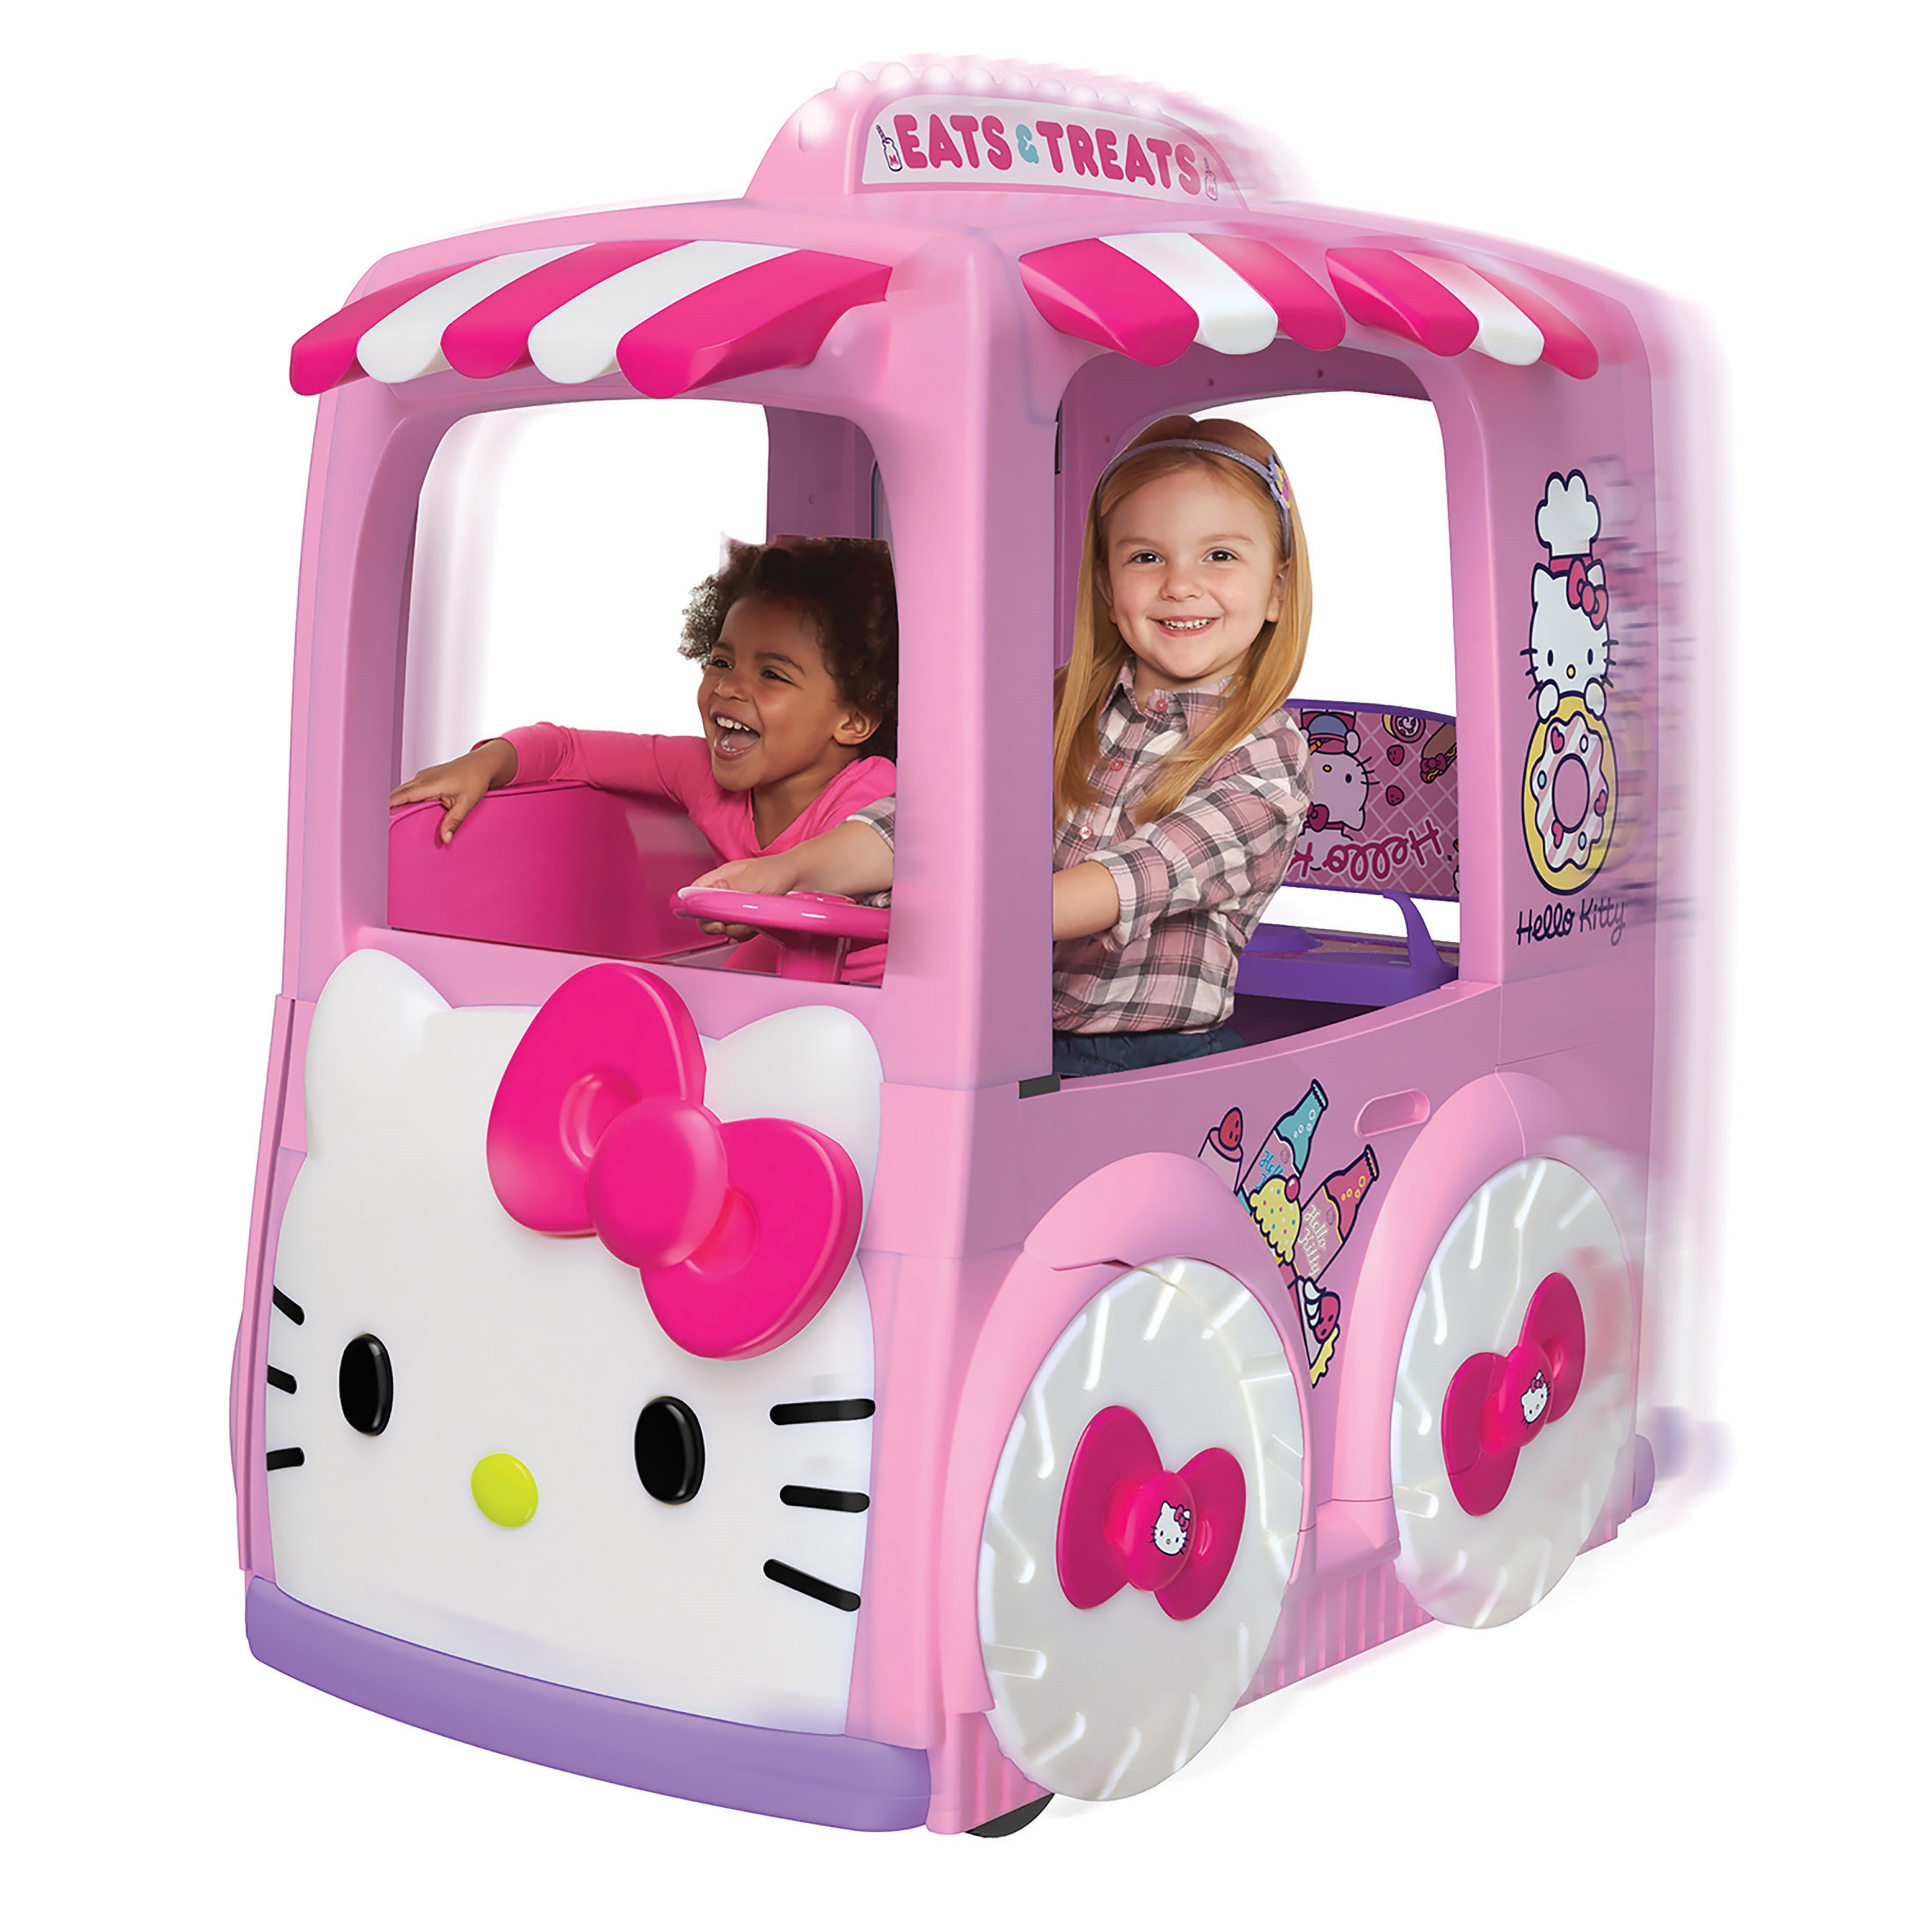 Hello Kitty12 Volt Eats and Treats Sweet Food Truck Play-Center Ride-On for Boys & Girls Ages 3 and up